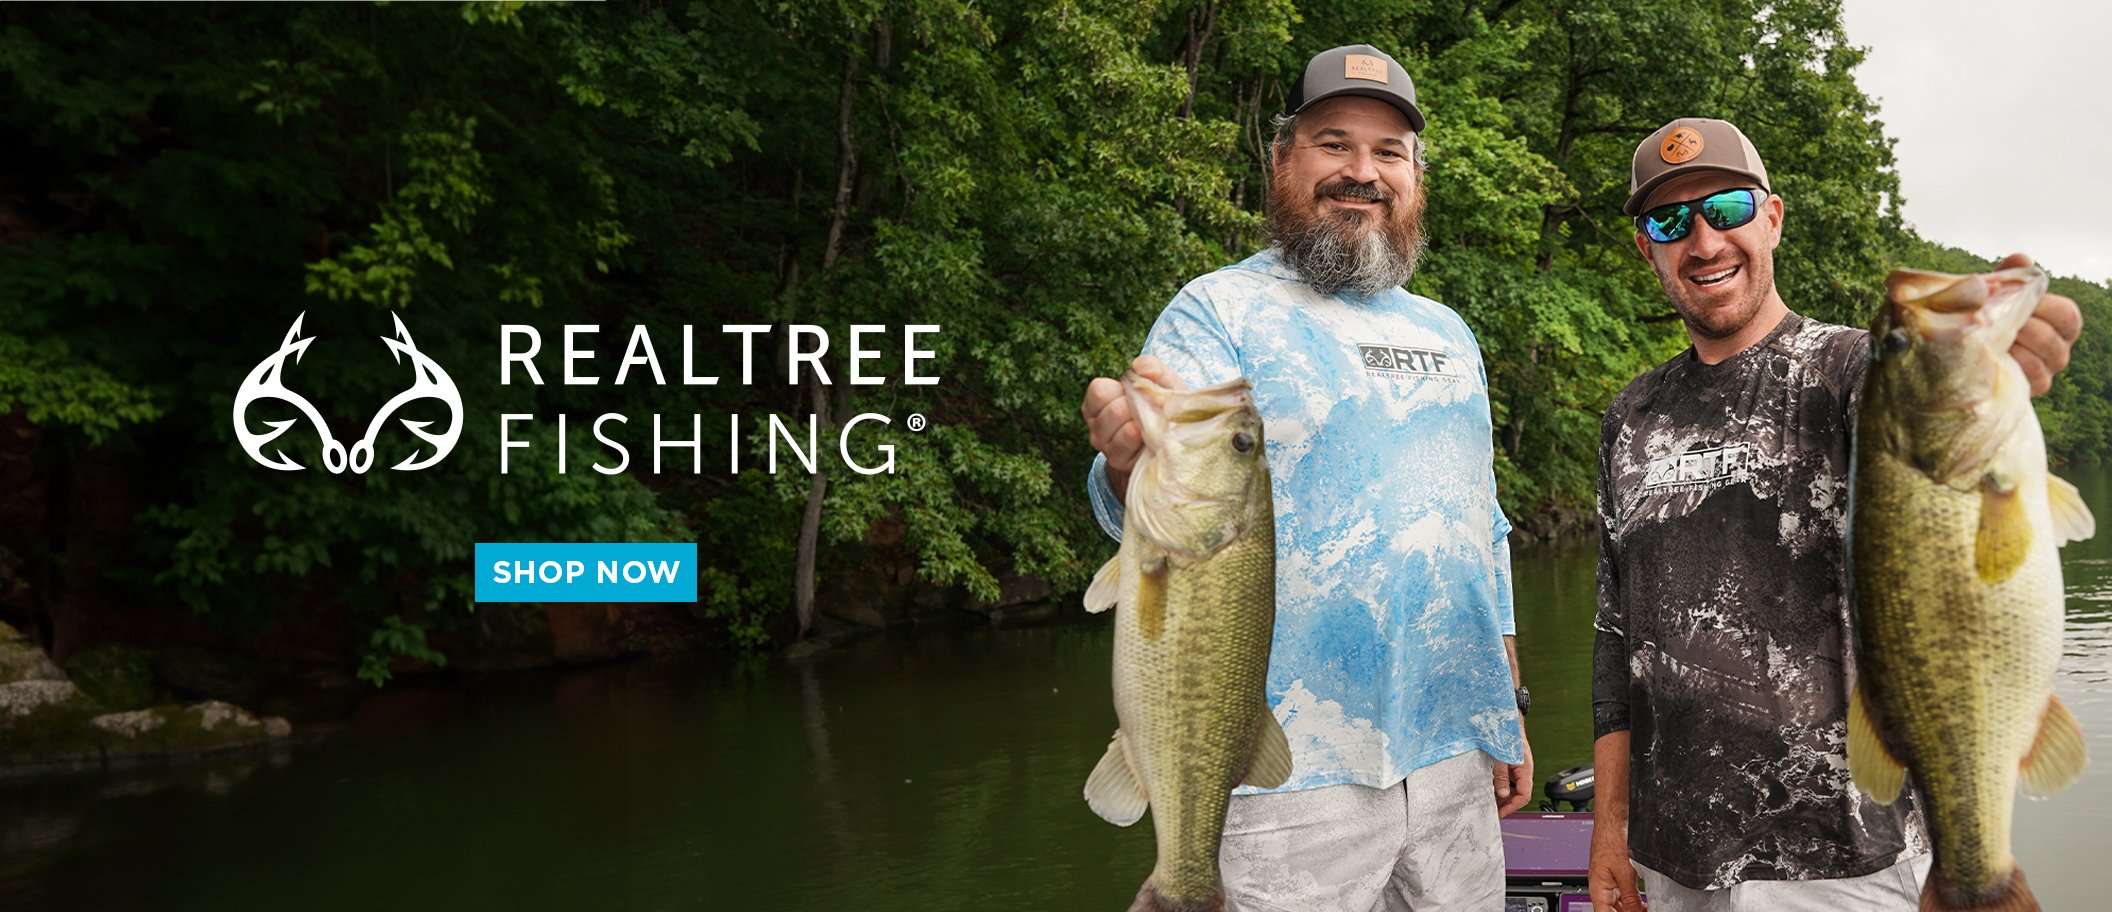 Should We Fish for Spawning Bass? - Realtree Camo